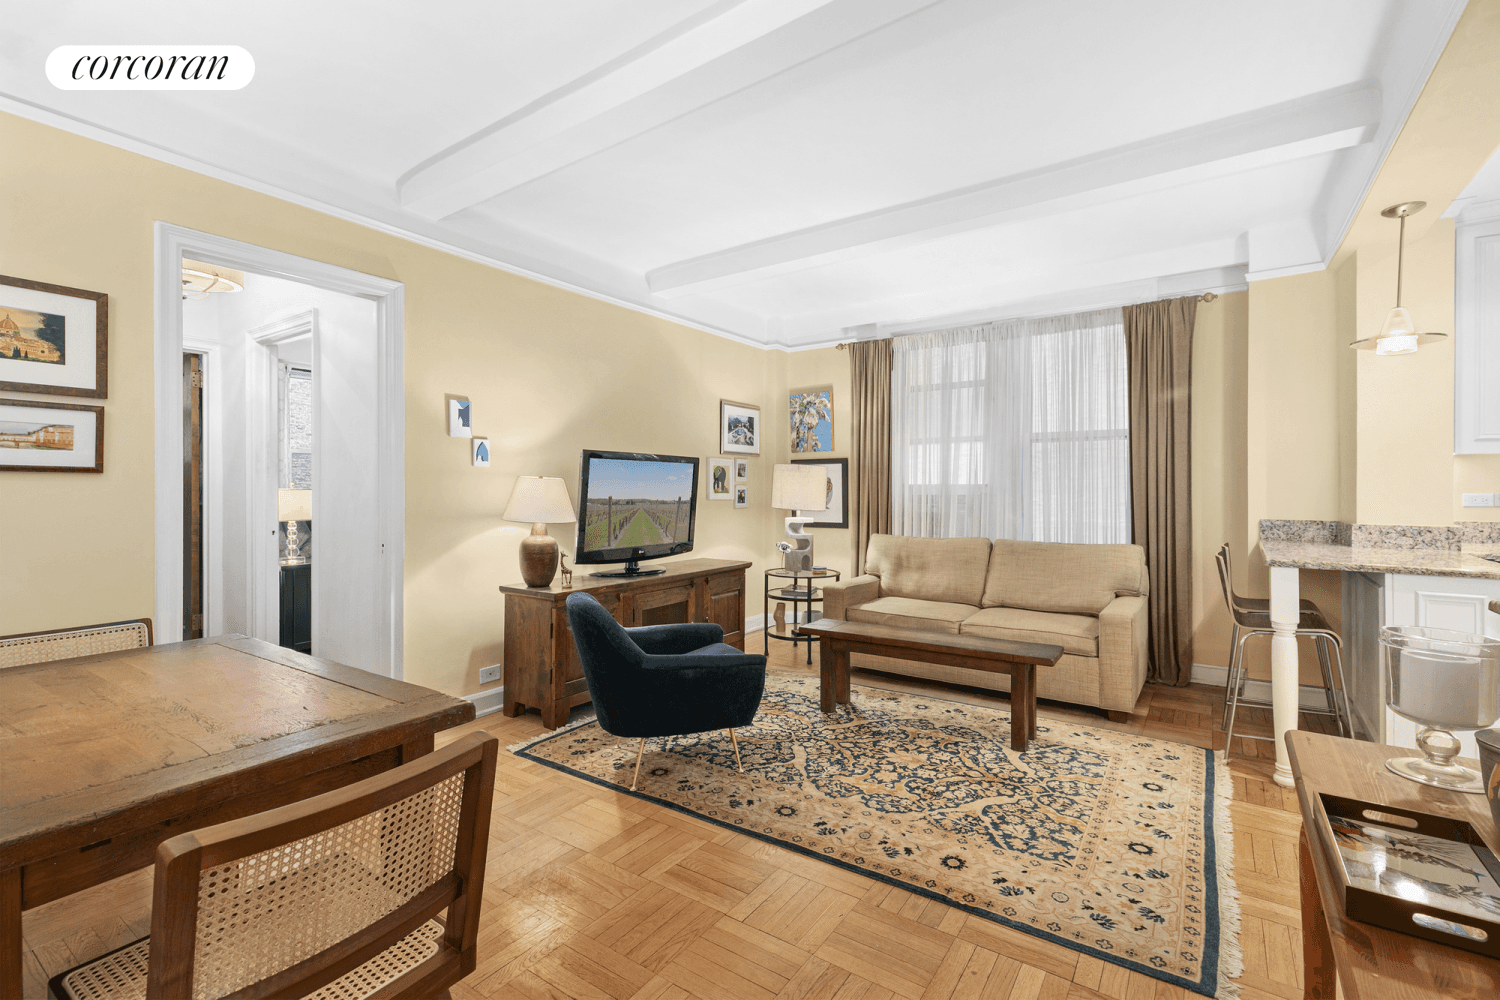 Apartment 4D is the rare offering of an elegant prewar one bedroom in a sought after cooperative located on one of the most desired Central Park blocks on the west ...